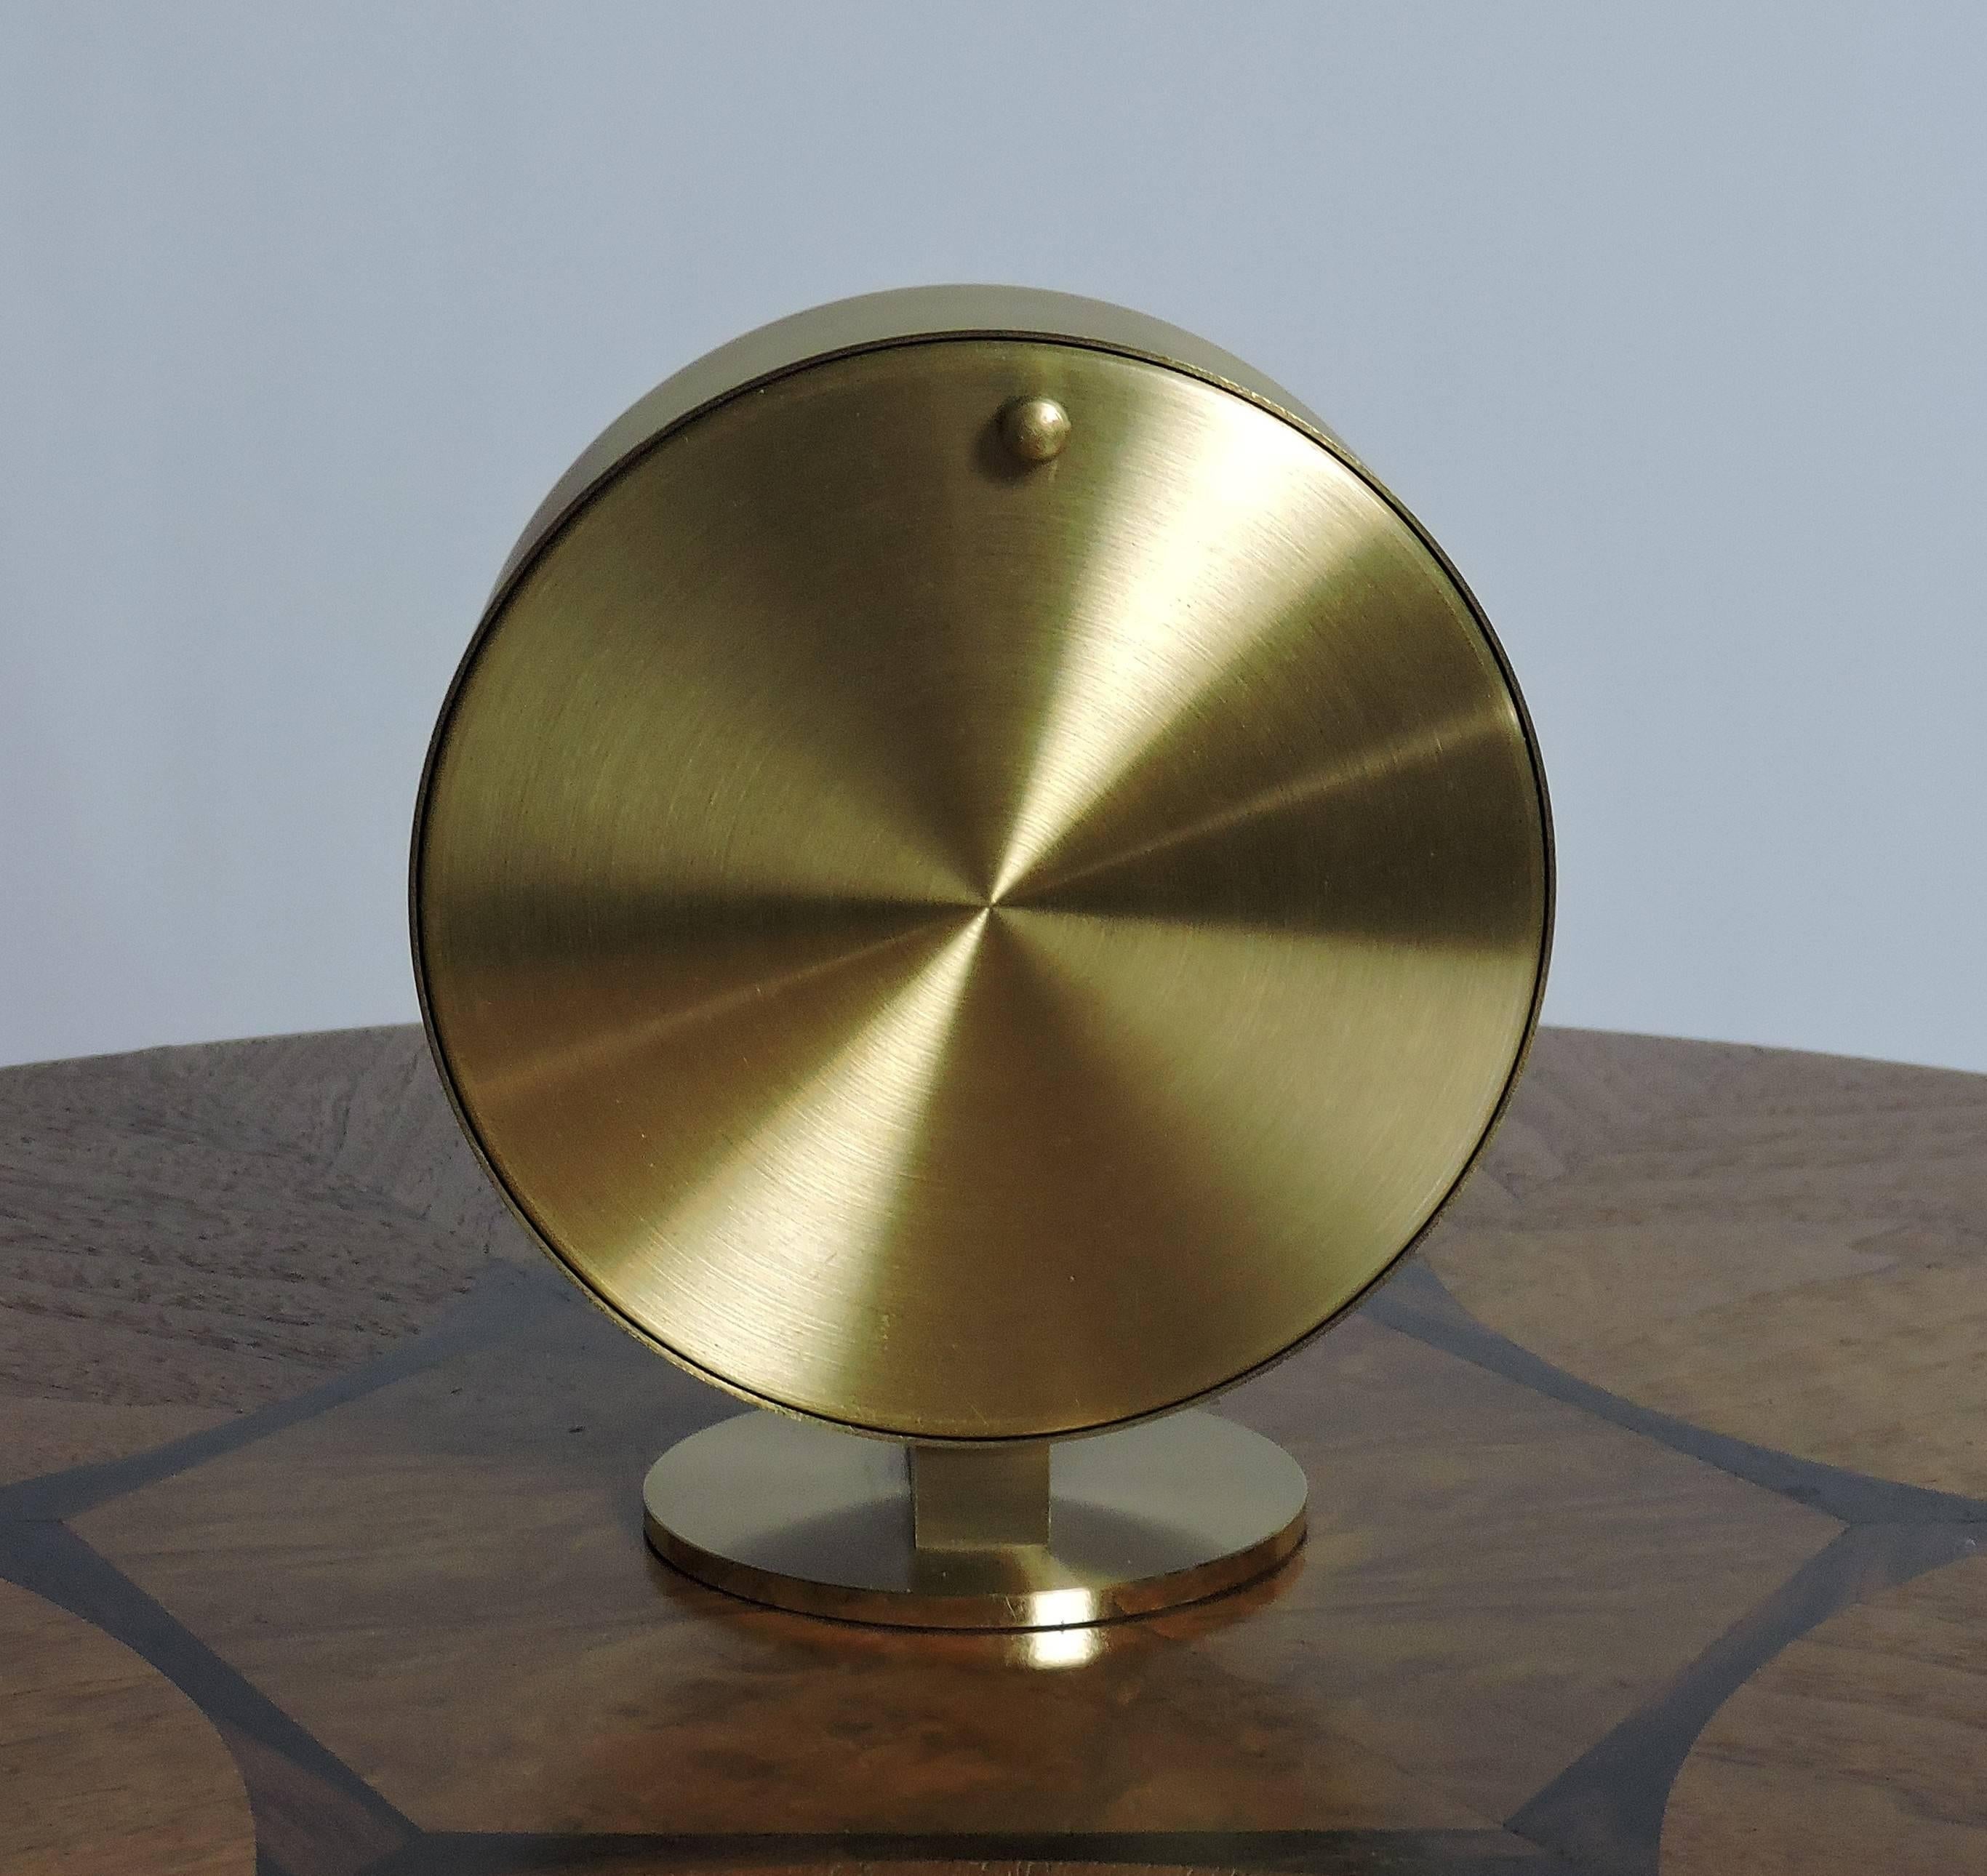 Handsome Mid-Century Modern Minimalist style desk clock based on a 1940 design by Nathan George Horwitt and manufactured by Howard Miller. This clock has a round black dial, a brass housing and brass details. Classic and timeless design, it takes a